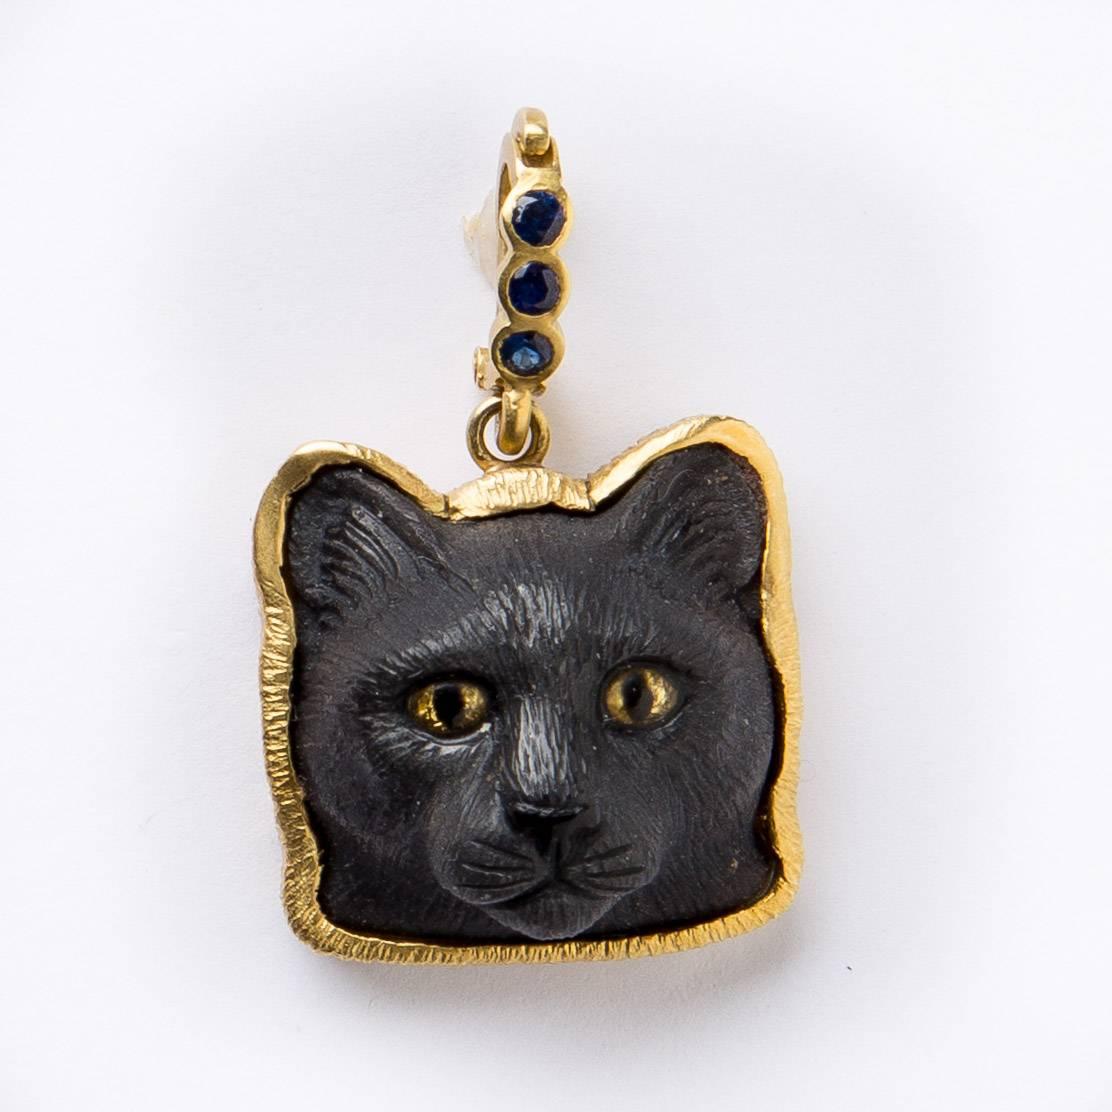 For cat lovers here is a beautifully hand carved obsidian cat's head pendant with crystal painted eyes set in an 18 karat gold frame with .30 carat blue sapphire enhancer which opens to hang from your necklace. 24mmx24mmx14mm stone size. Created by